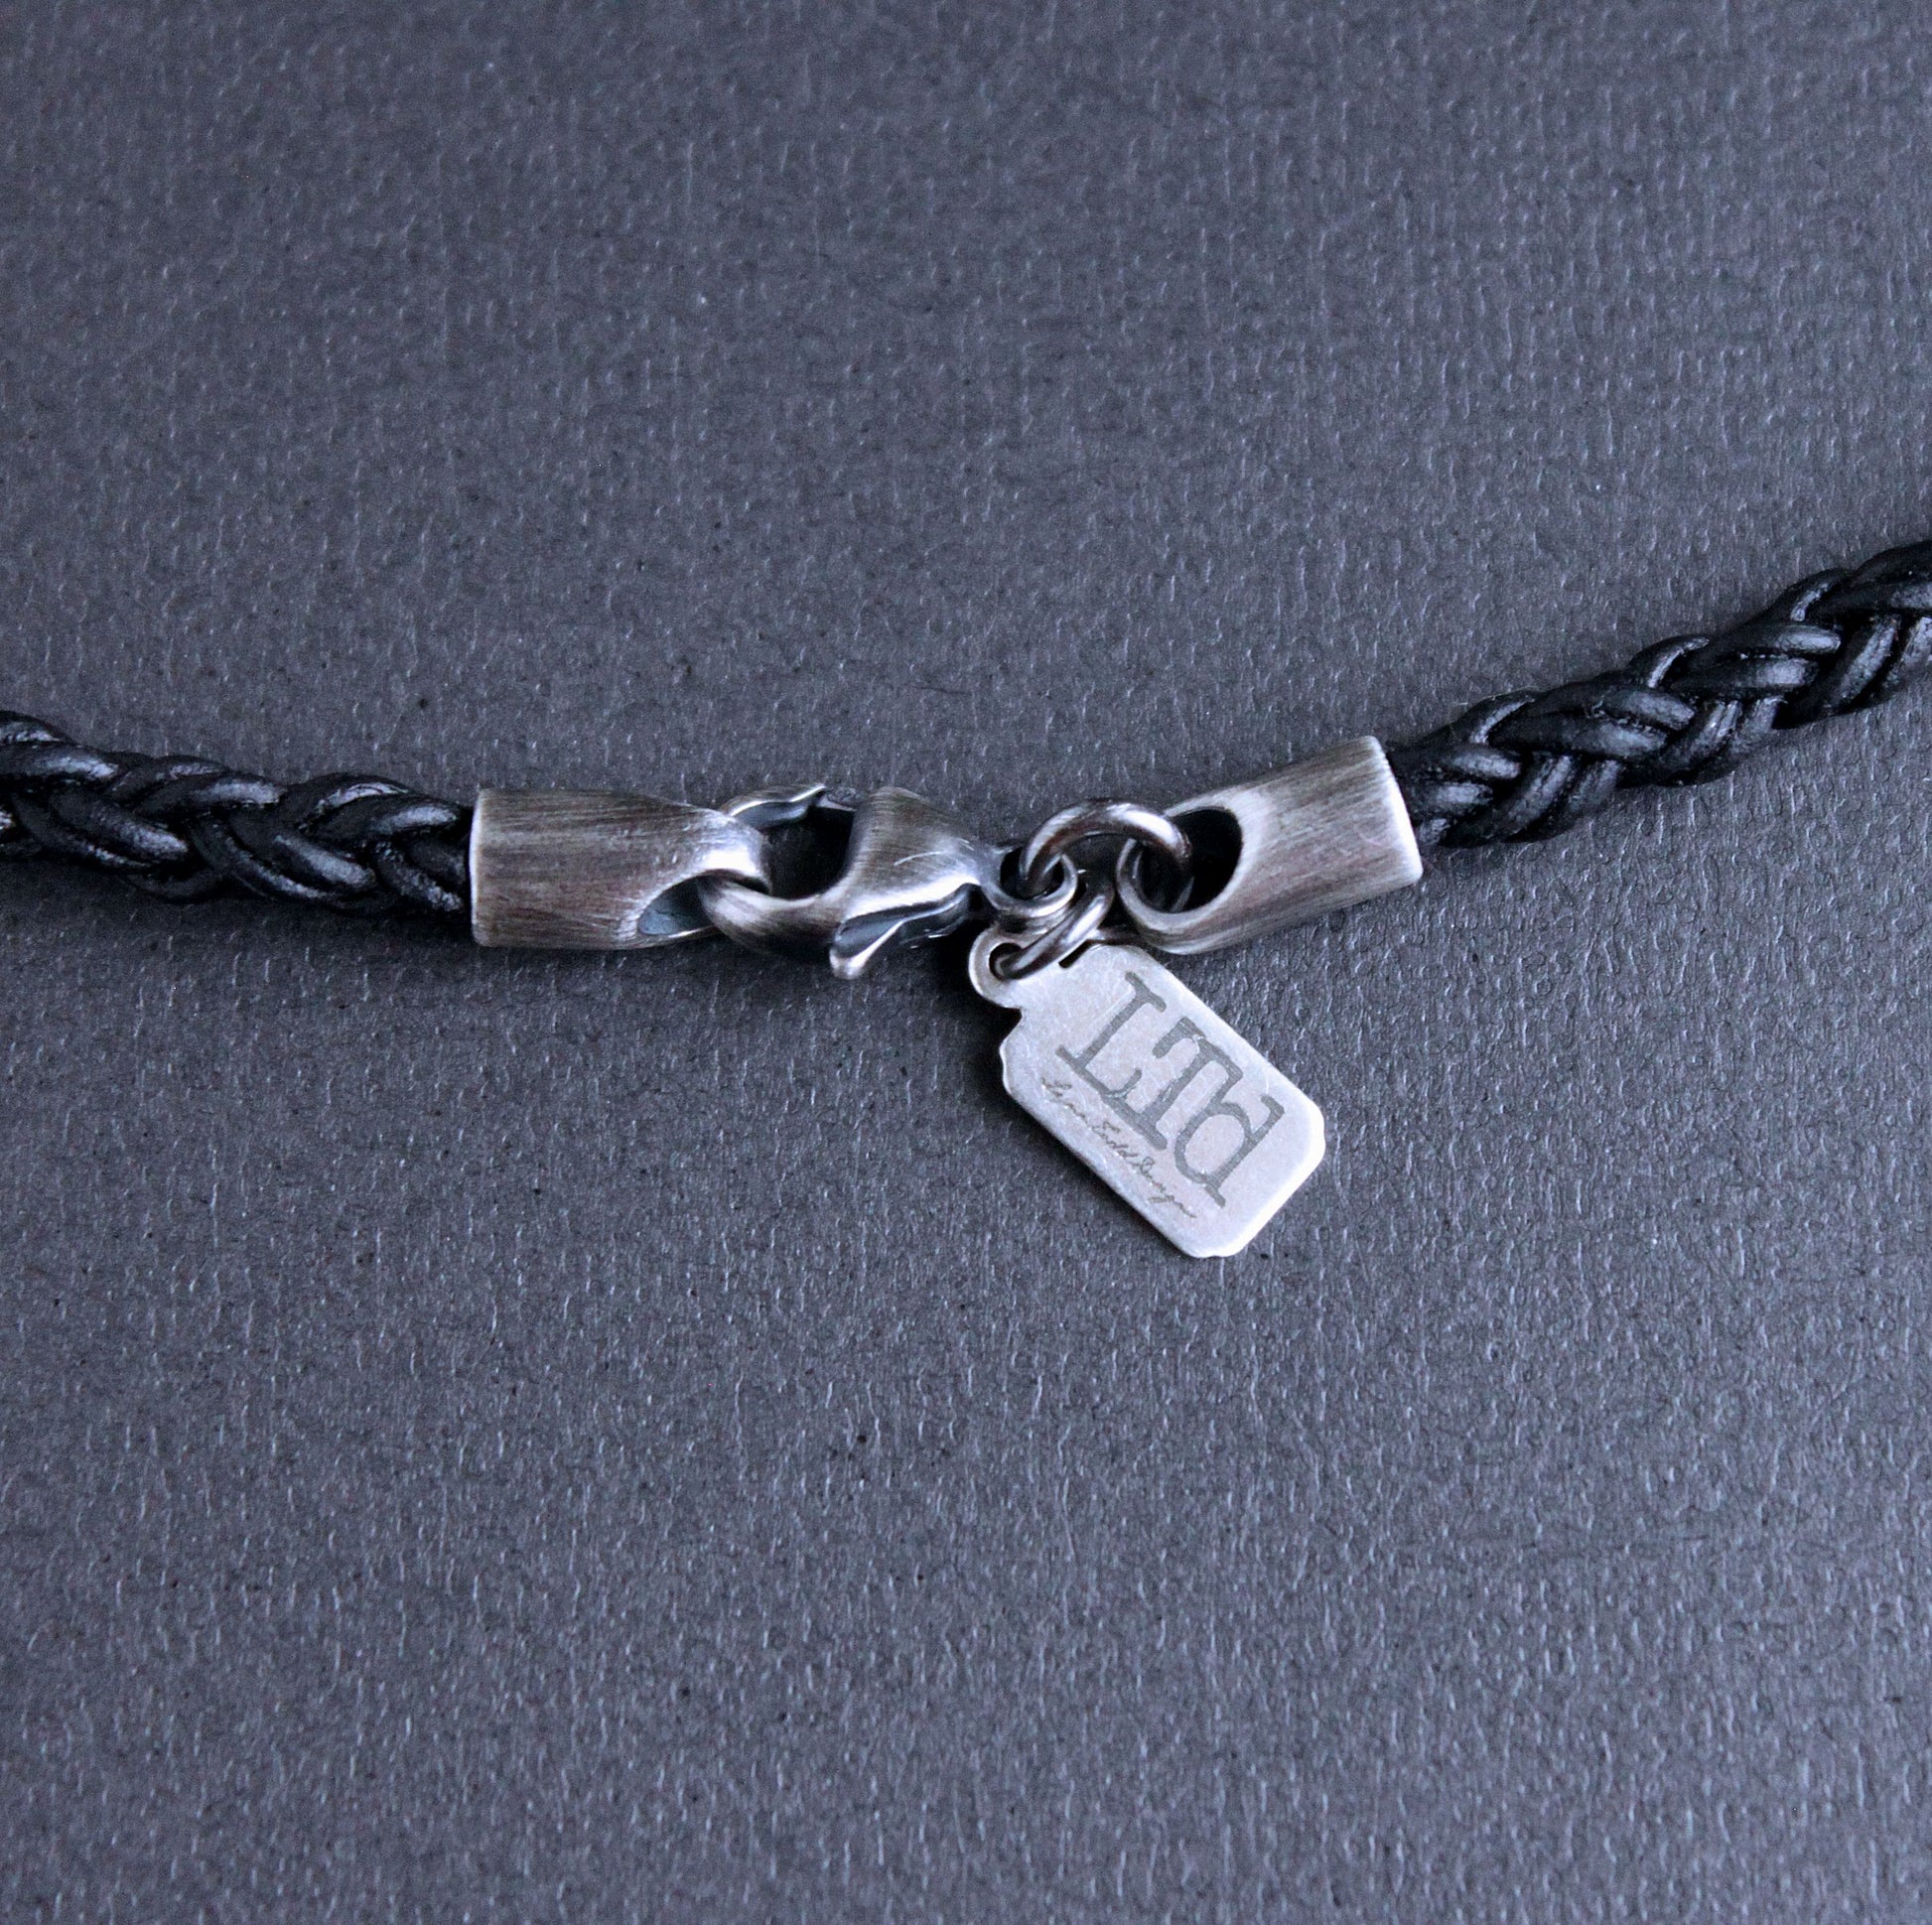 Leather Necklace Cord Clasp  Black Leather Cord Necklace - Black